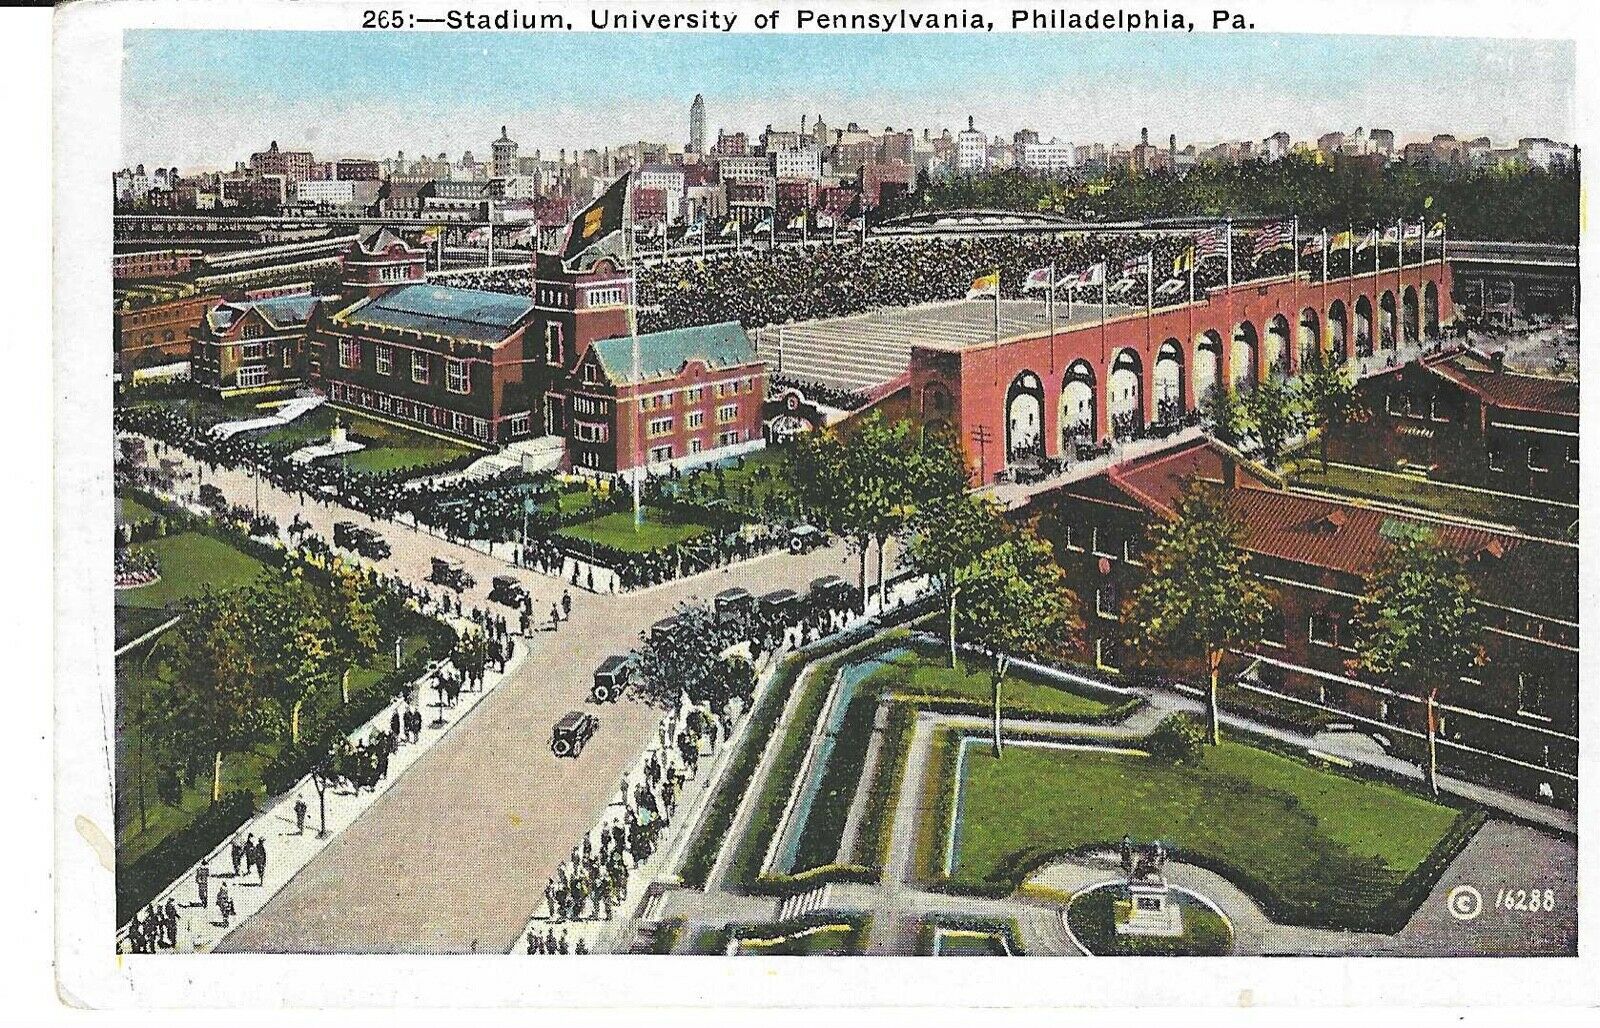 View showing Business Section Uniontown, Pennsylvania PA Postcards